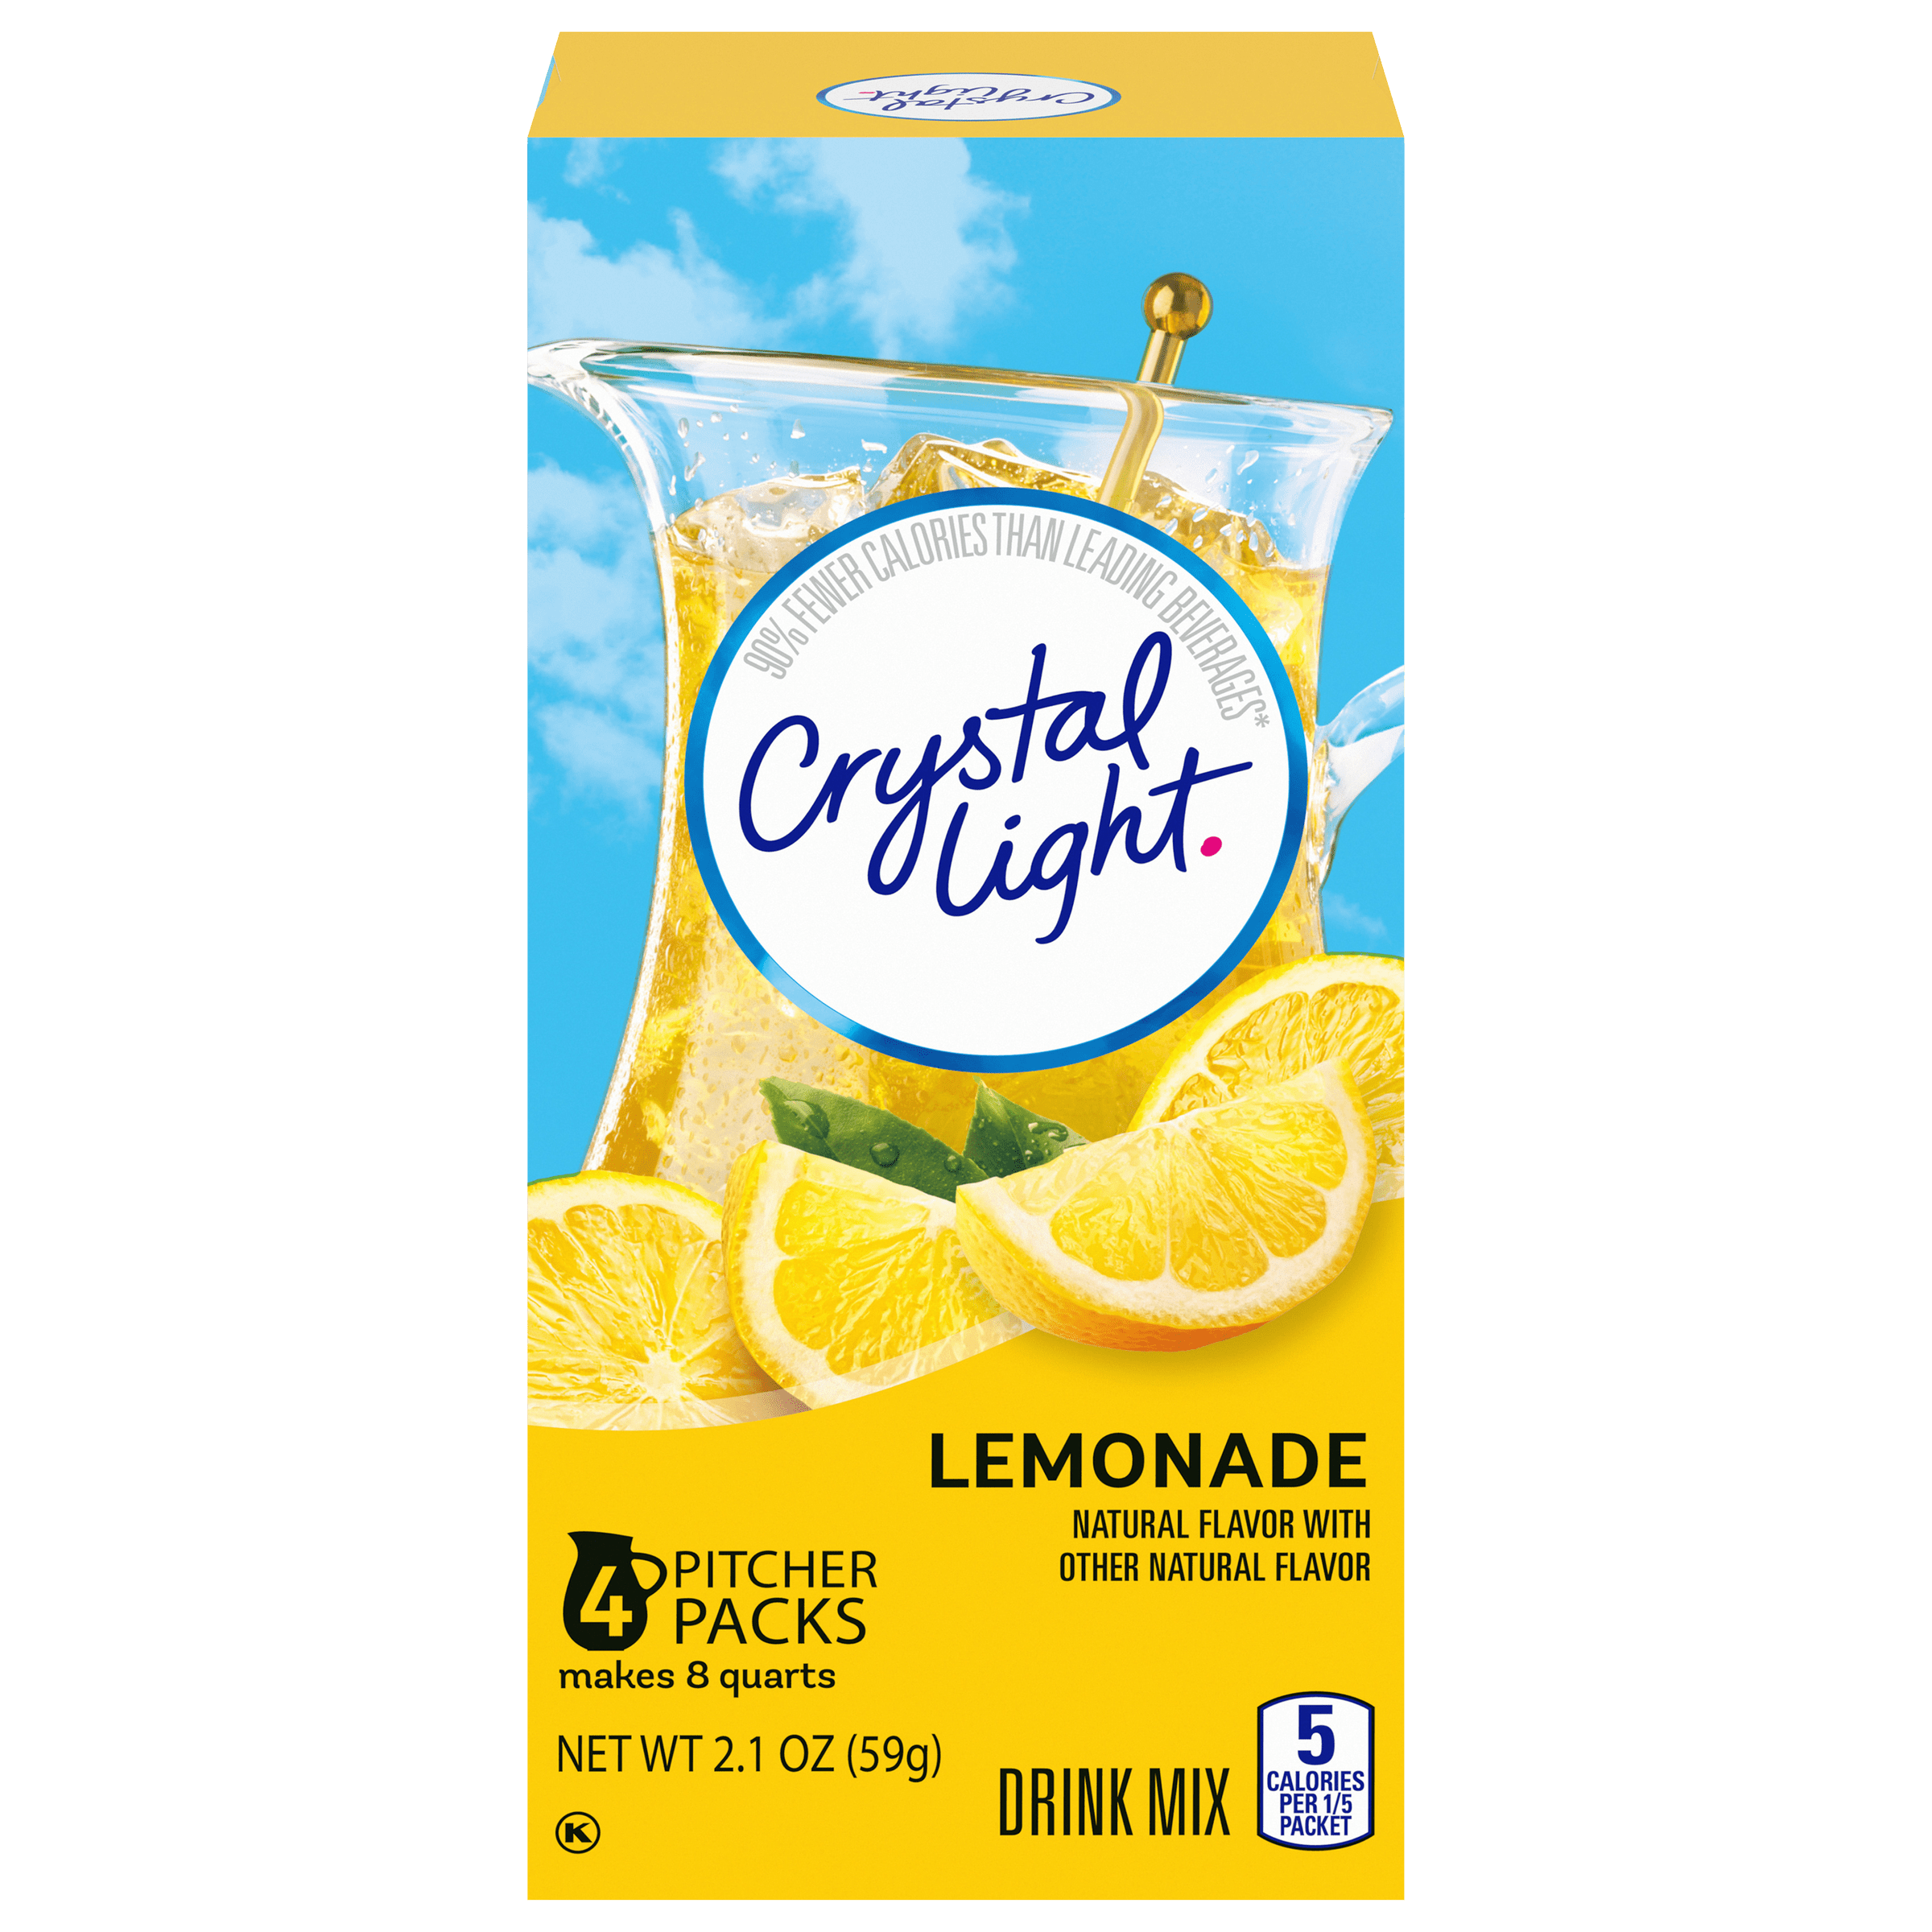 Lemonade Naturally Flavored Powdered Drink Mix